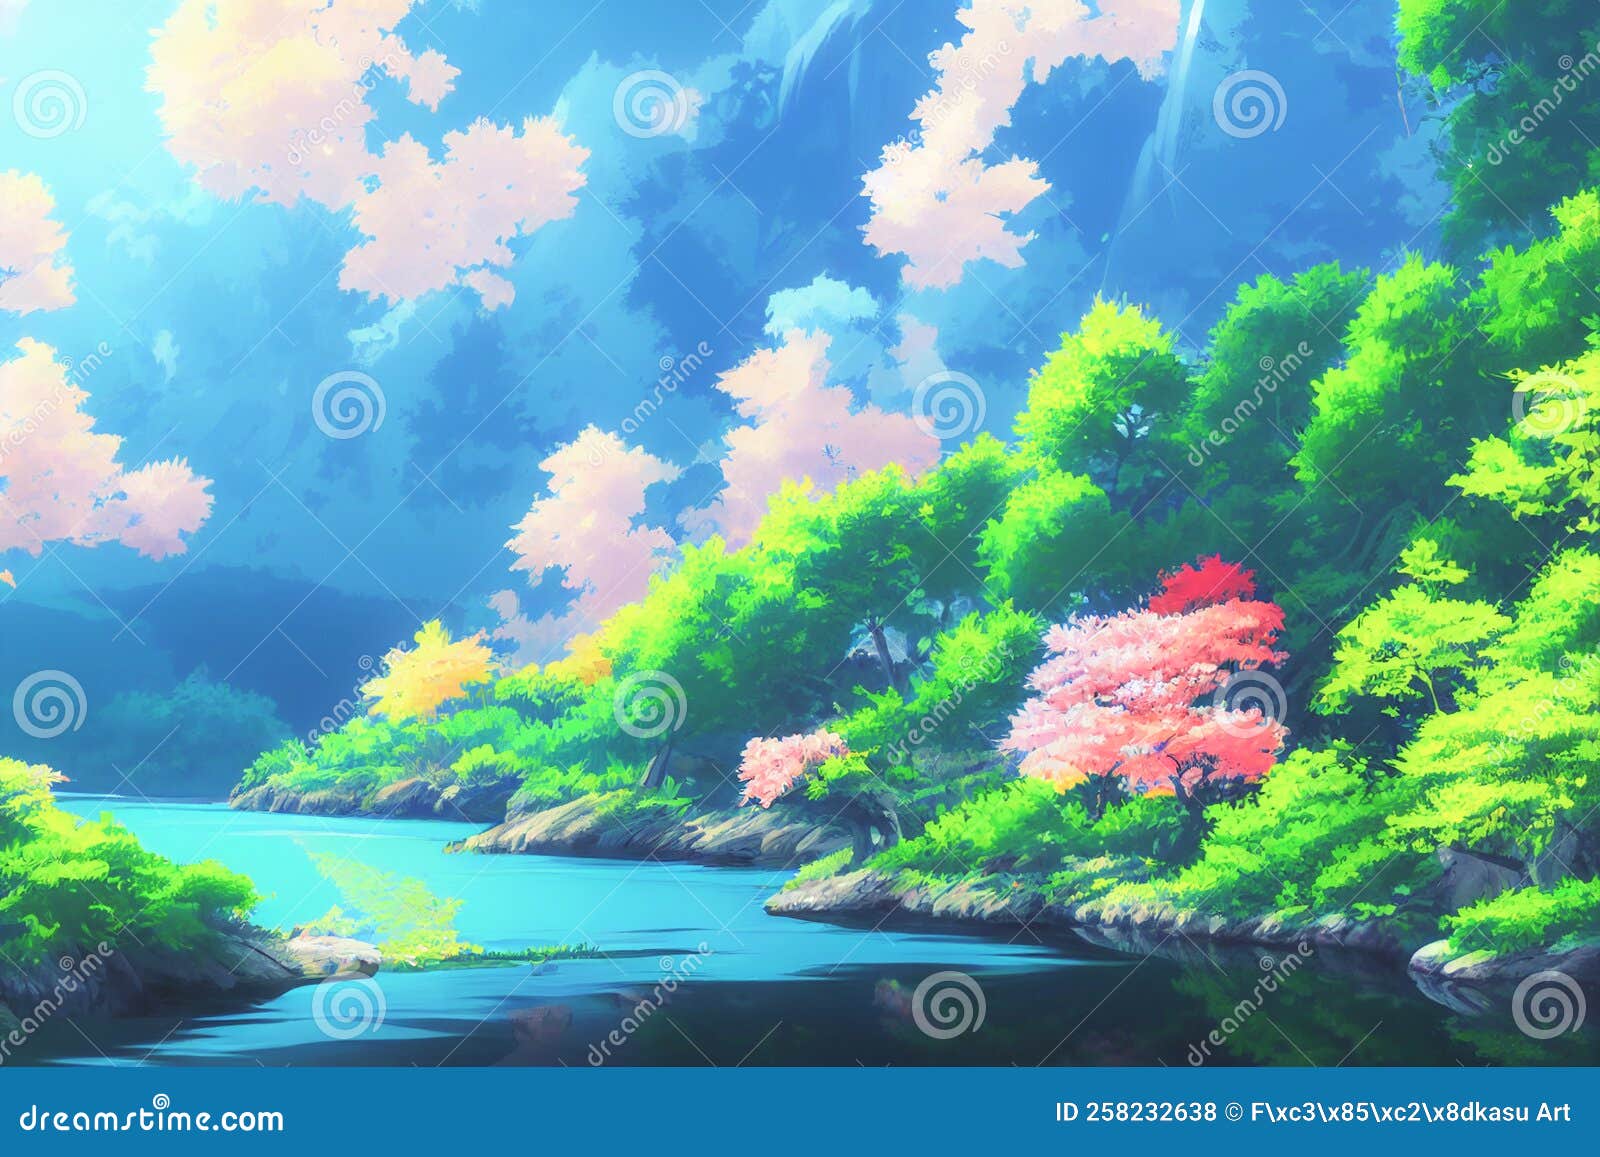 Premium Photo | Fuji mount with sakura trees and river, landscape anime  style. generated by ai